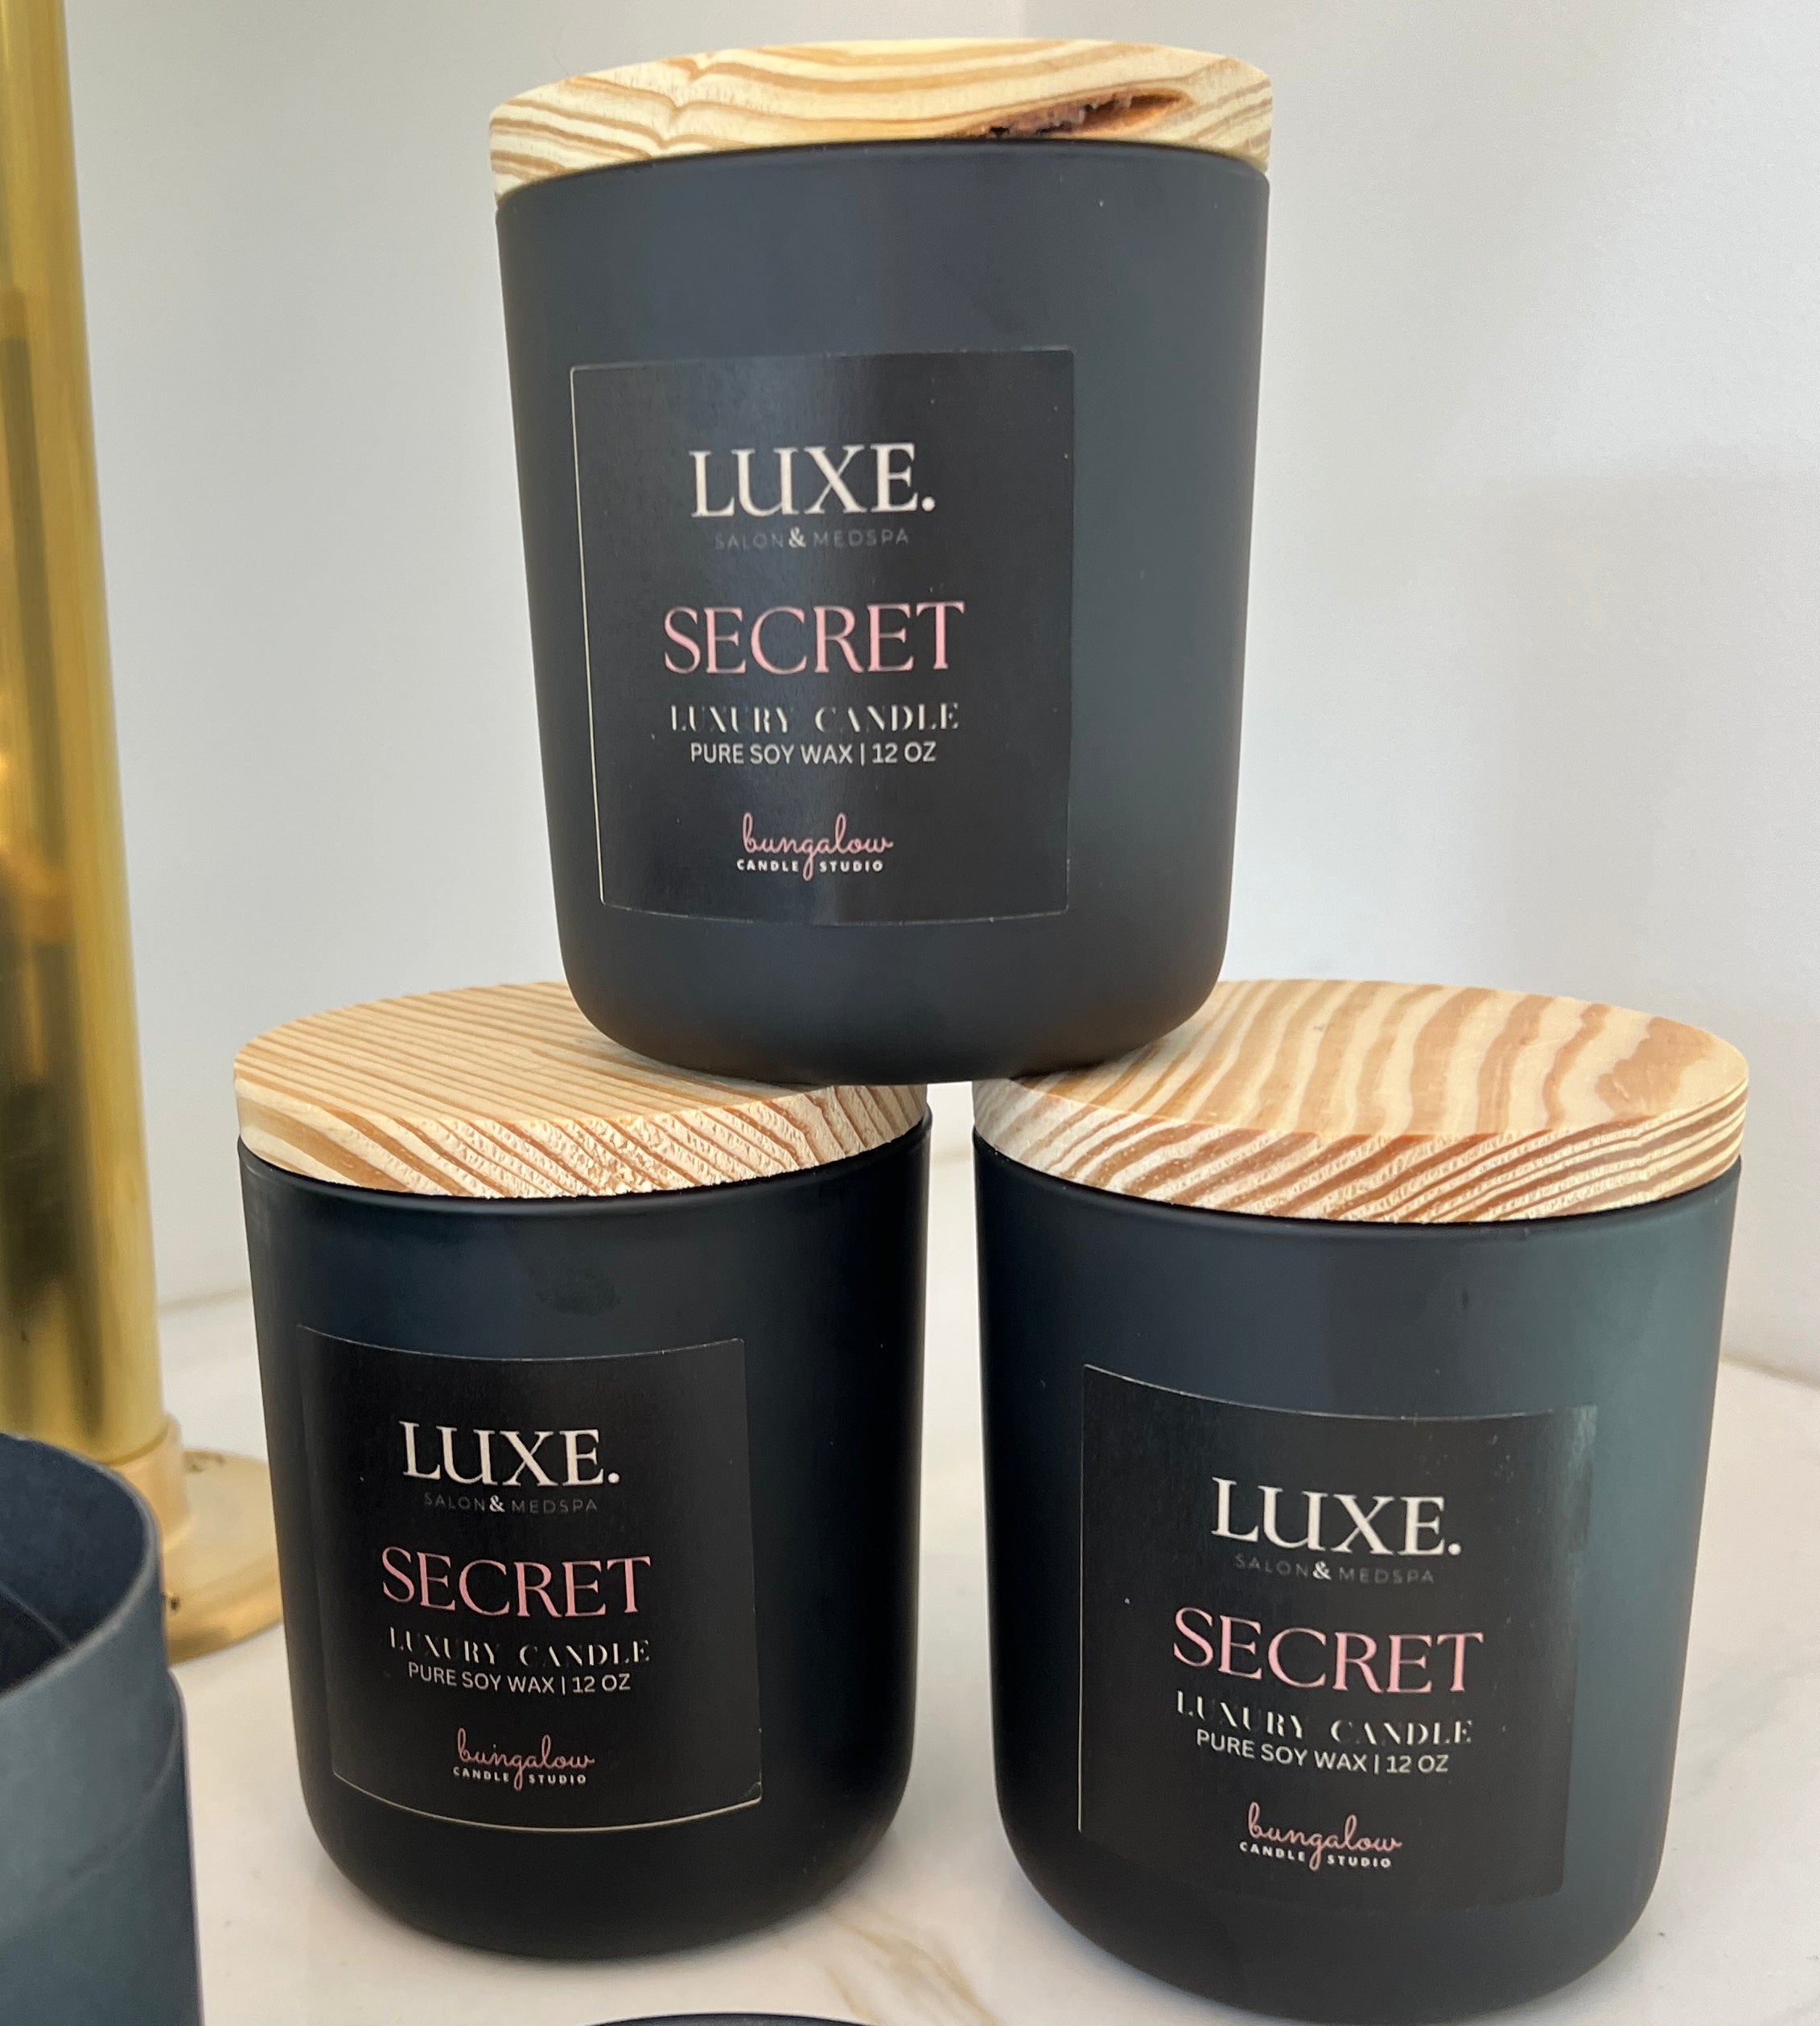 Luxe. Luxury Candle